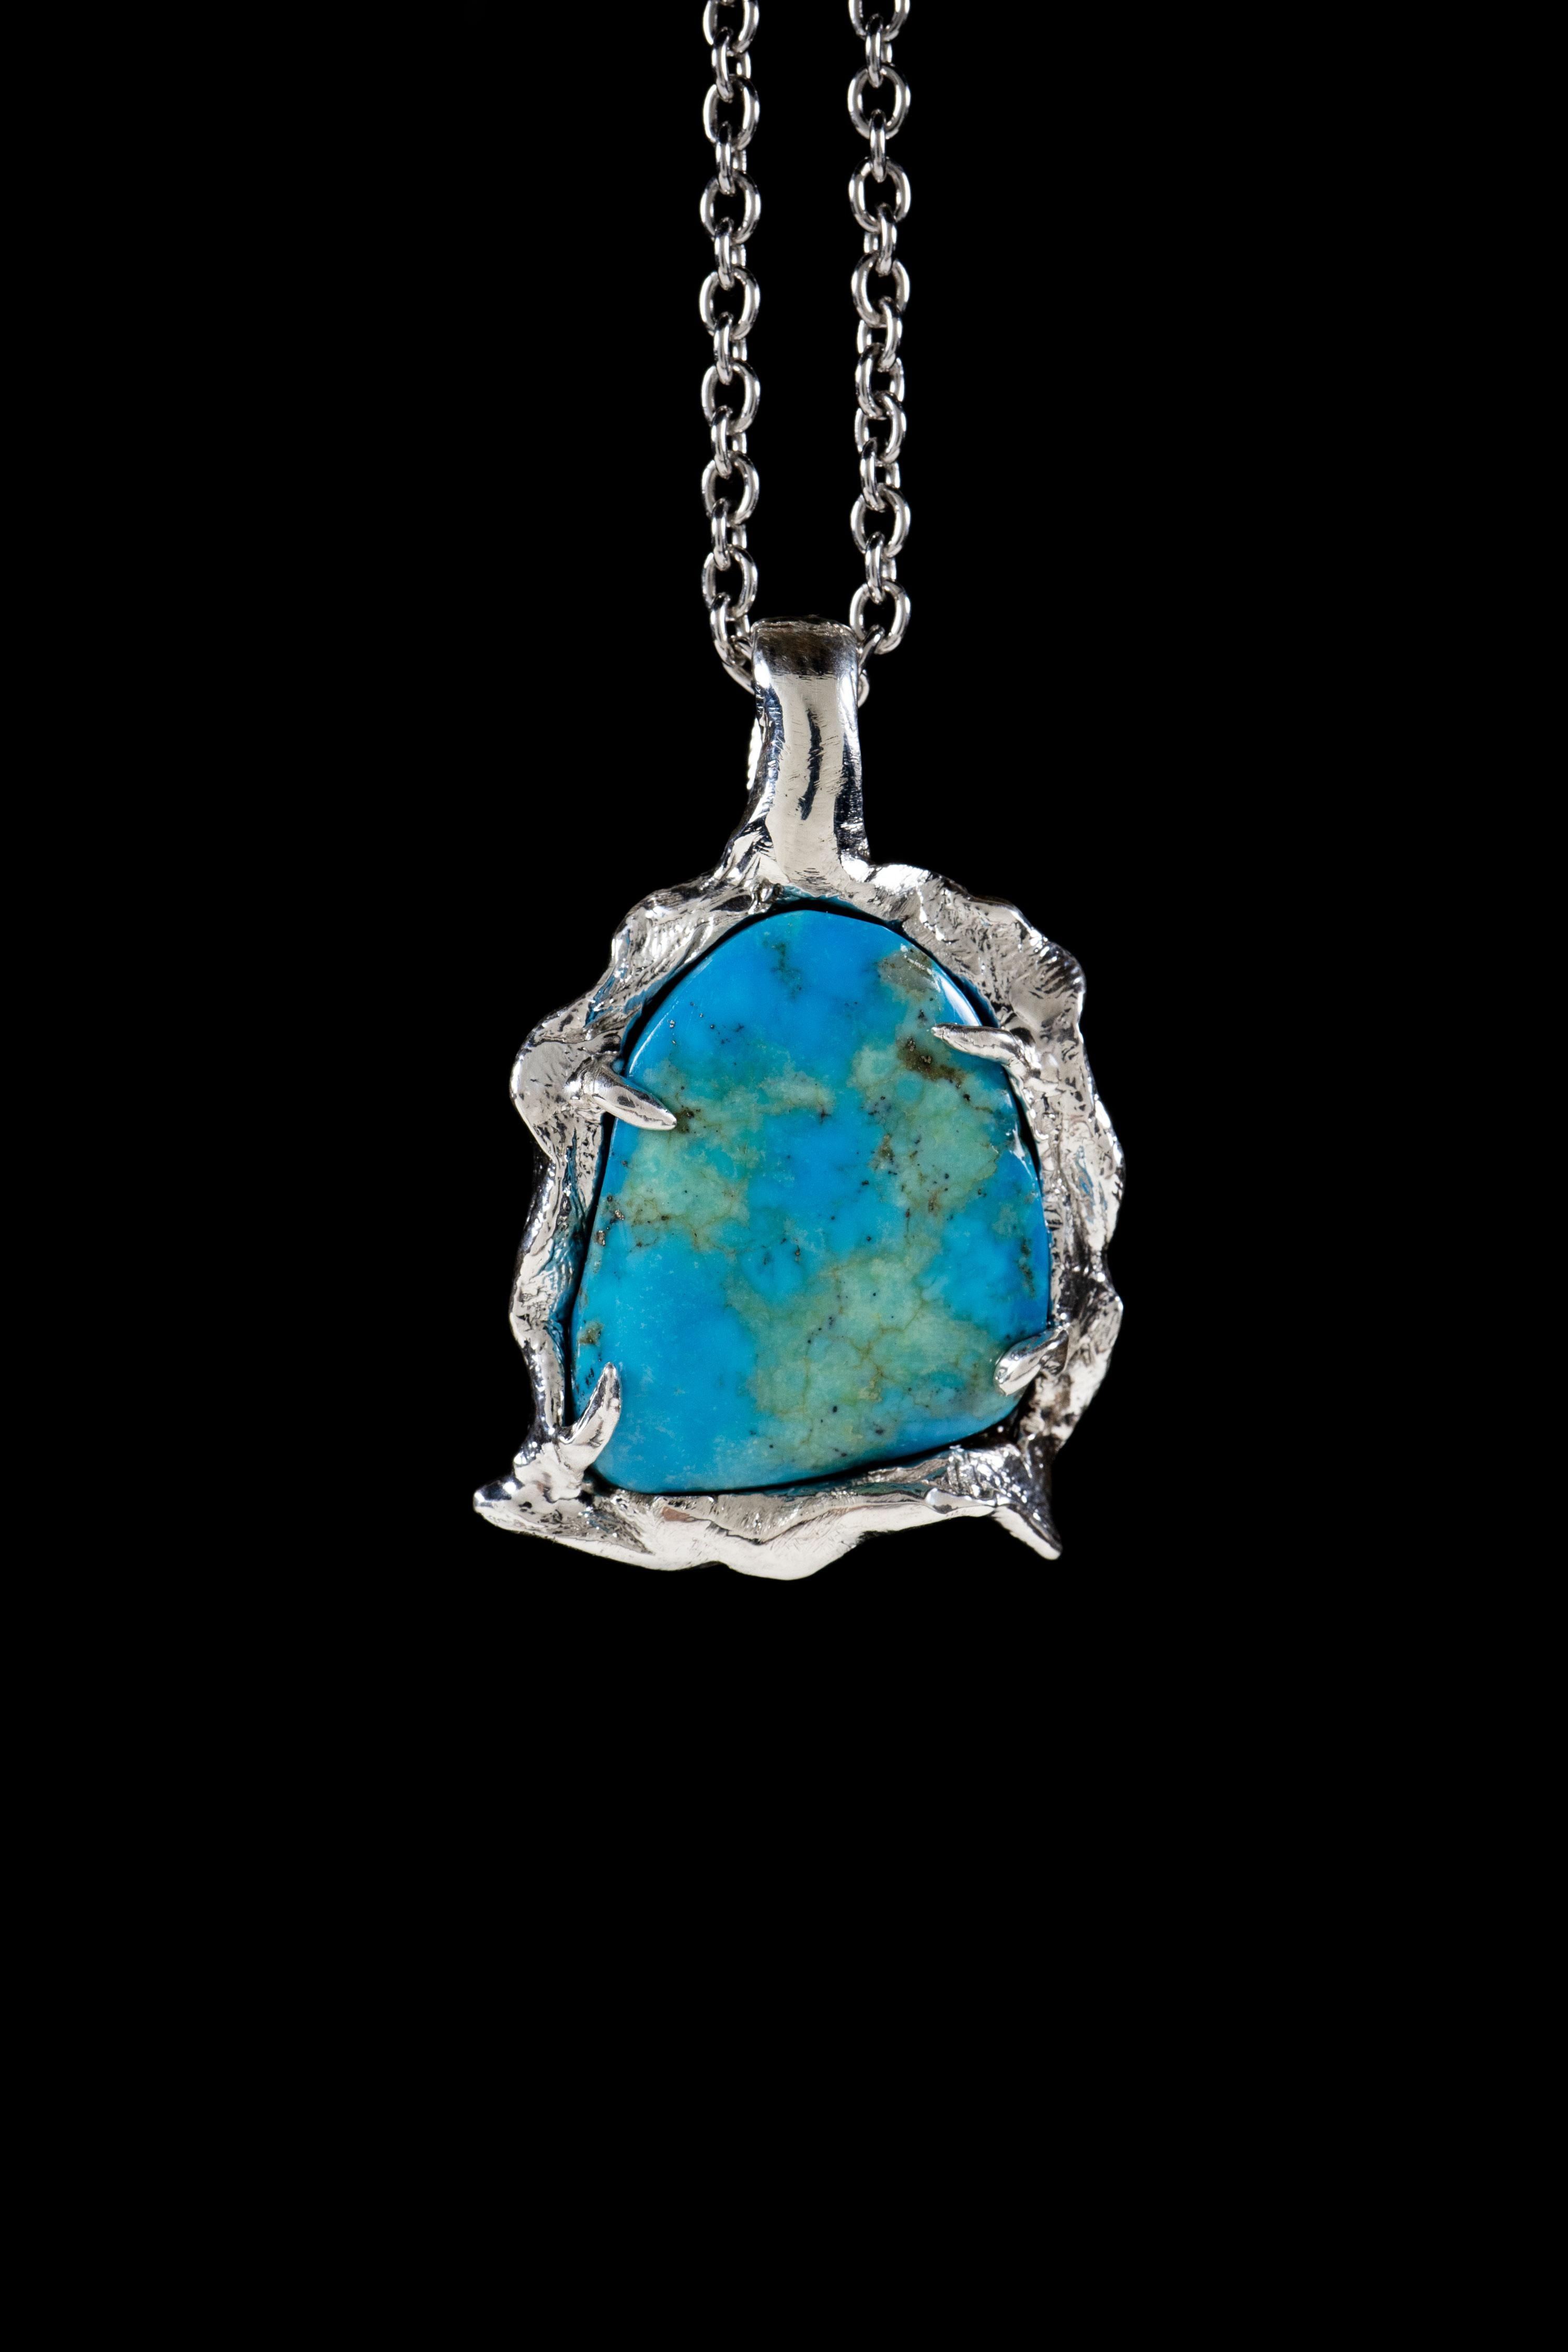 Water is a handmade pendant by Ken Fury, carved and cast in sterling silver with a beautiful turquoise stone. The sculptural design of the pendant symbolizes the fluid and ever-changing nature of life, while the turquoise stone represents healing,